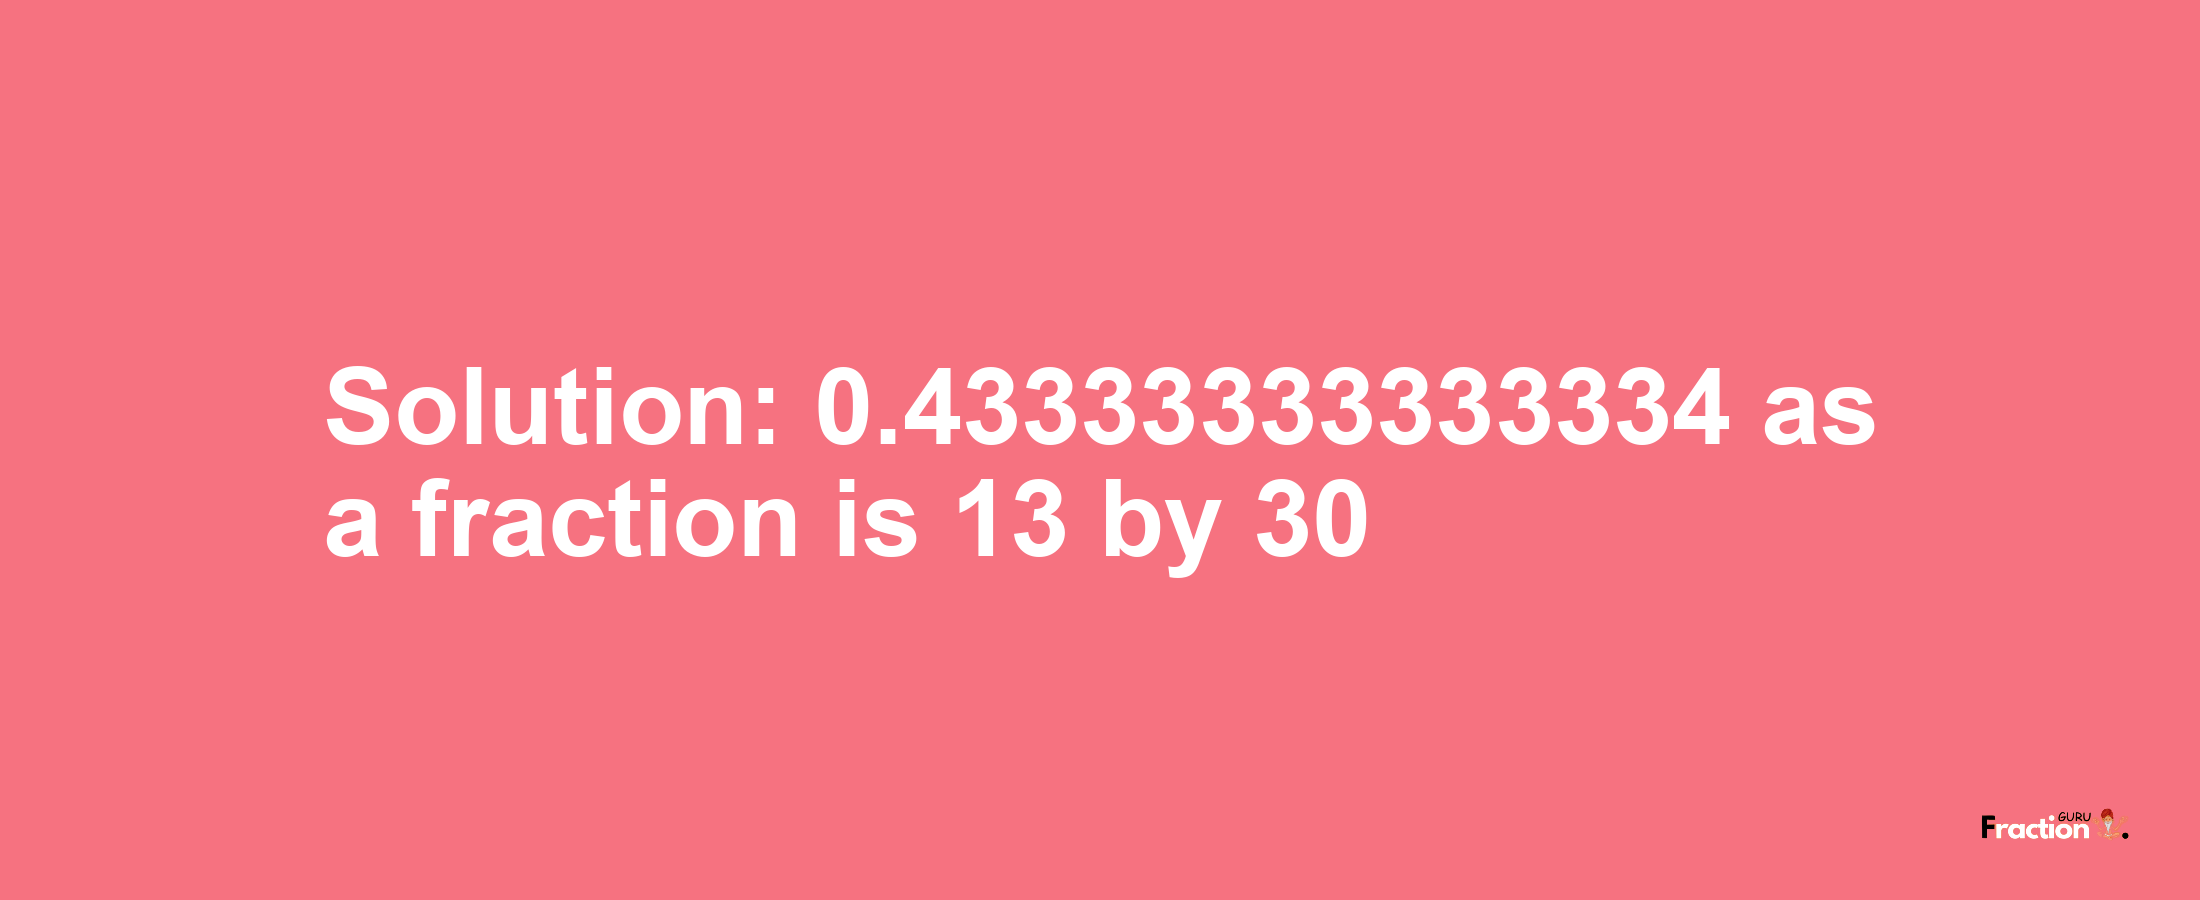 Solution:0.43333333333334 as a fraction is 13/30